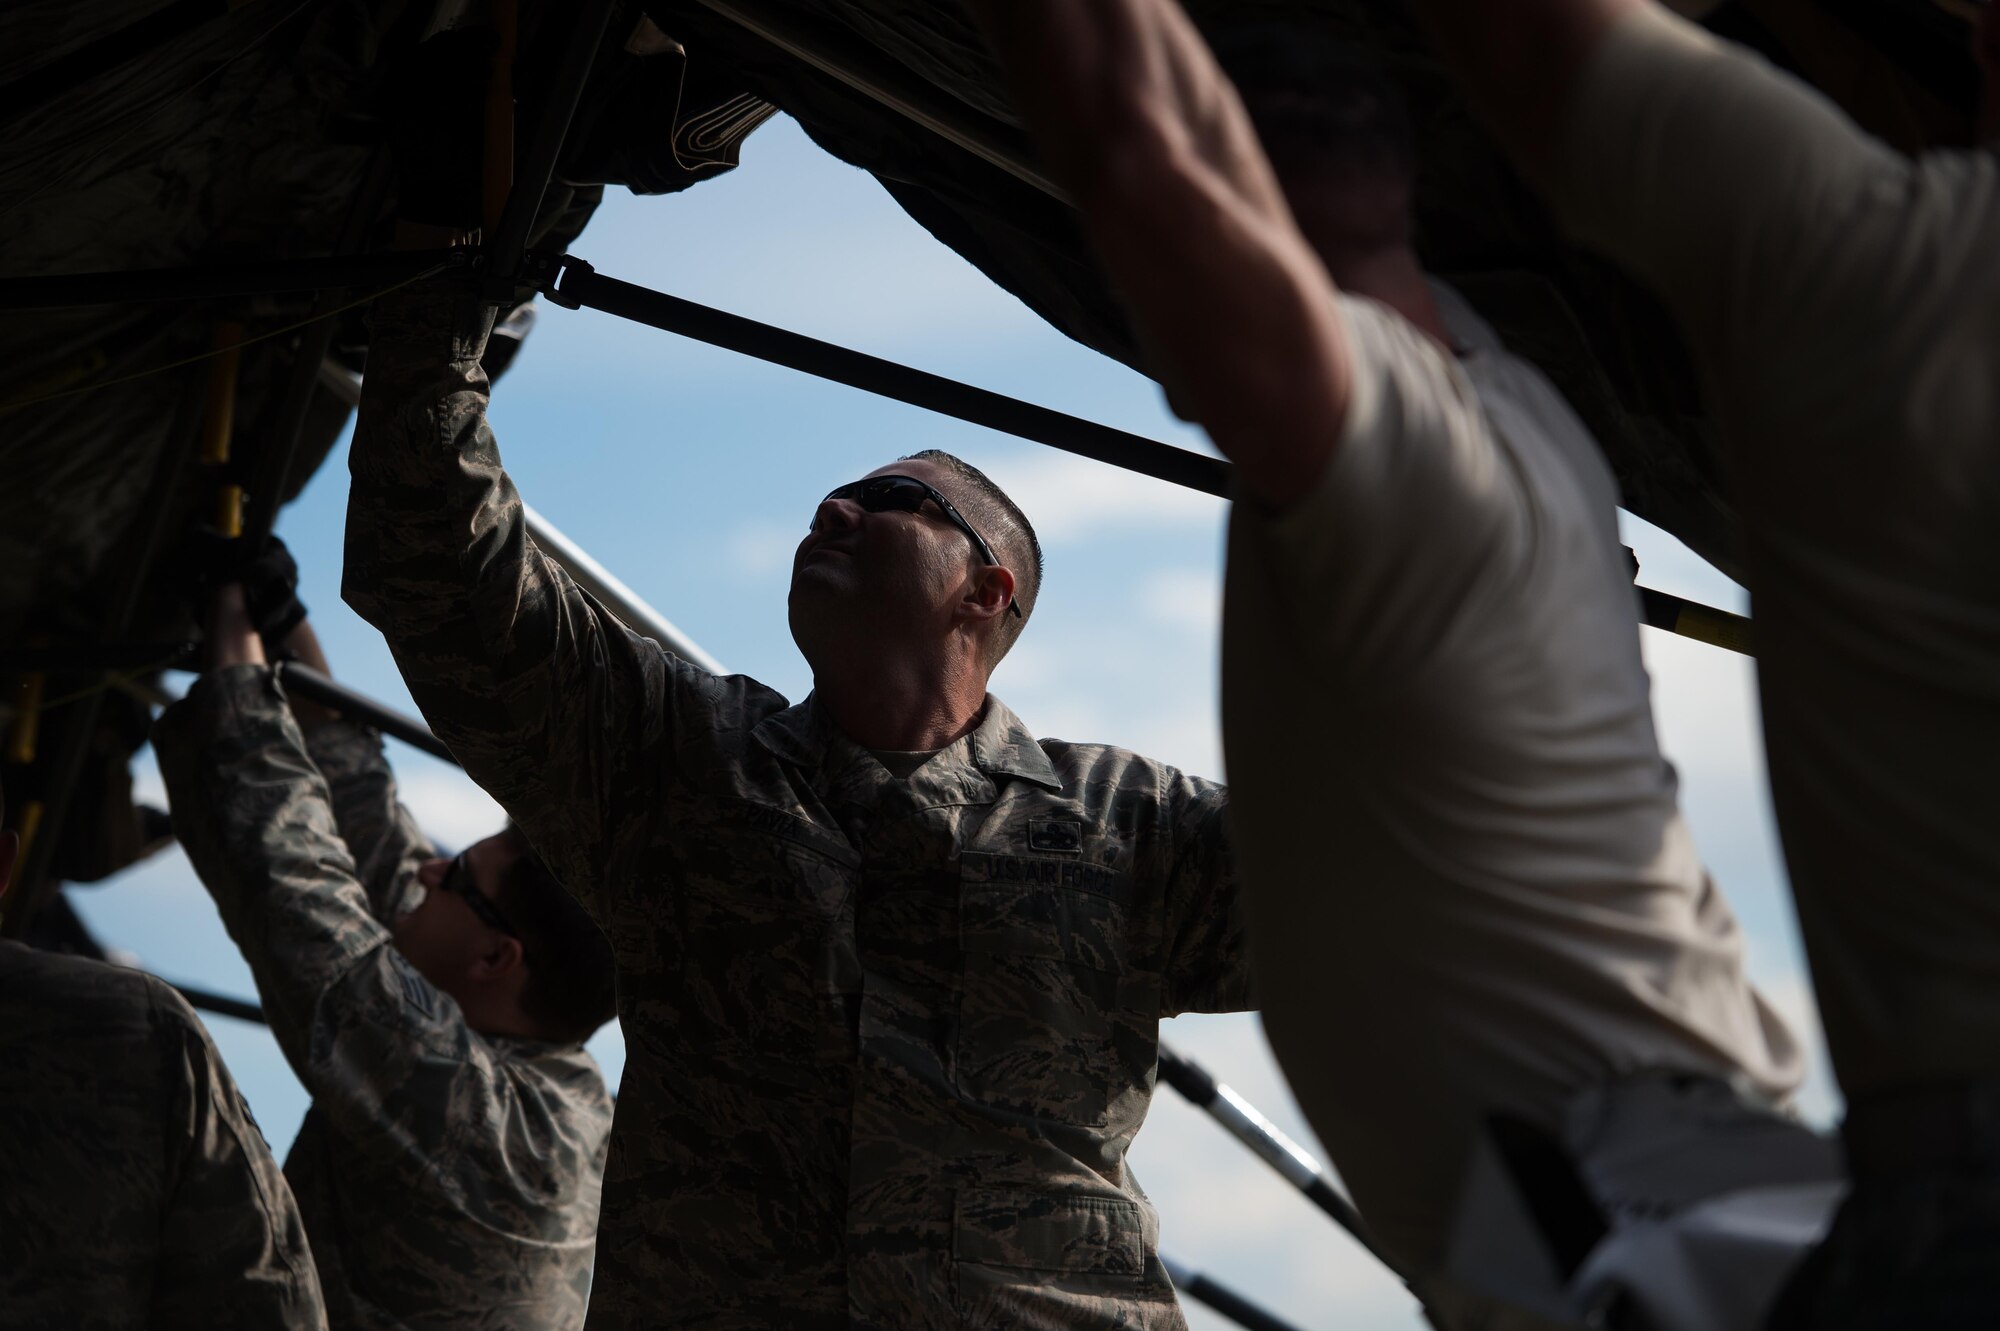 U.S. Air Force Master Sgt. Christopher Pavia,921st Contingency Response Squadron Maintenance Flight chief, helps set up a tent during Exercise Cerberus Strike 16-02 at the Fort Carson Air Terminal, Colo., Sept. 09, 2016. C-Strike is a joint exercise where contingency response forces rehearsed potential real-world situations by training with Army counterparts in cargo uploading and downloading on aircraft, aircraft engine running off-loads, communications, aerial port procedures, and air mobility liaison officer operations with airdrops from aircraft. (U.S. Air Force photo by Master Sgt. Joseph Swafford)